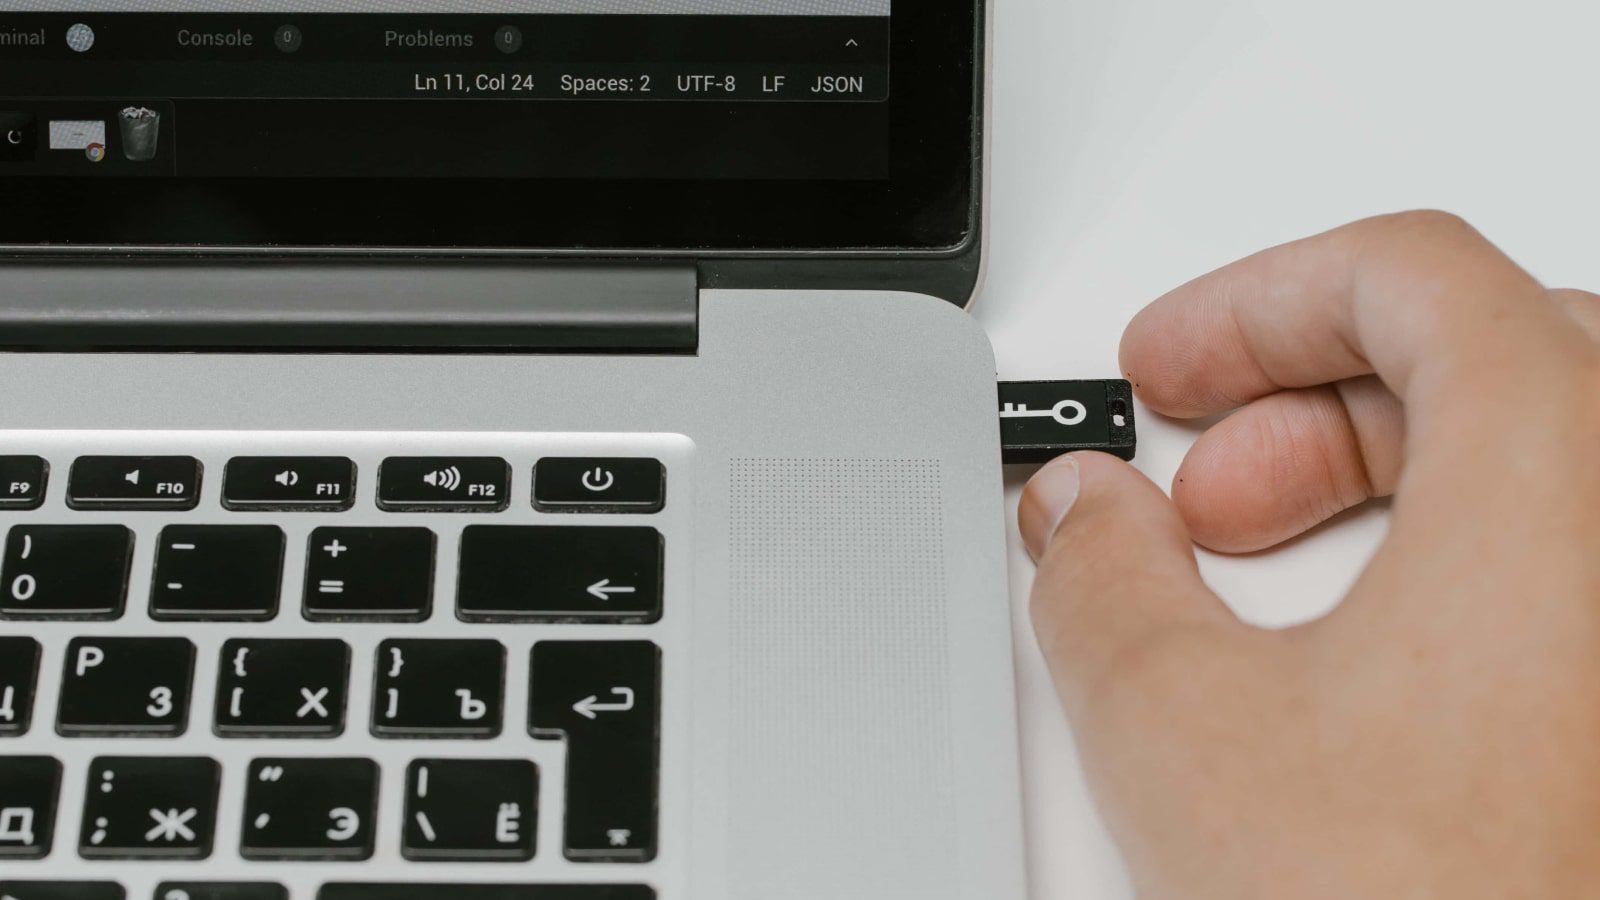 A hand removing a USB drive from a laptop.